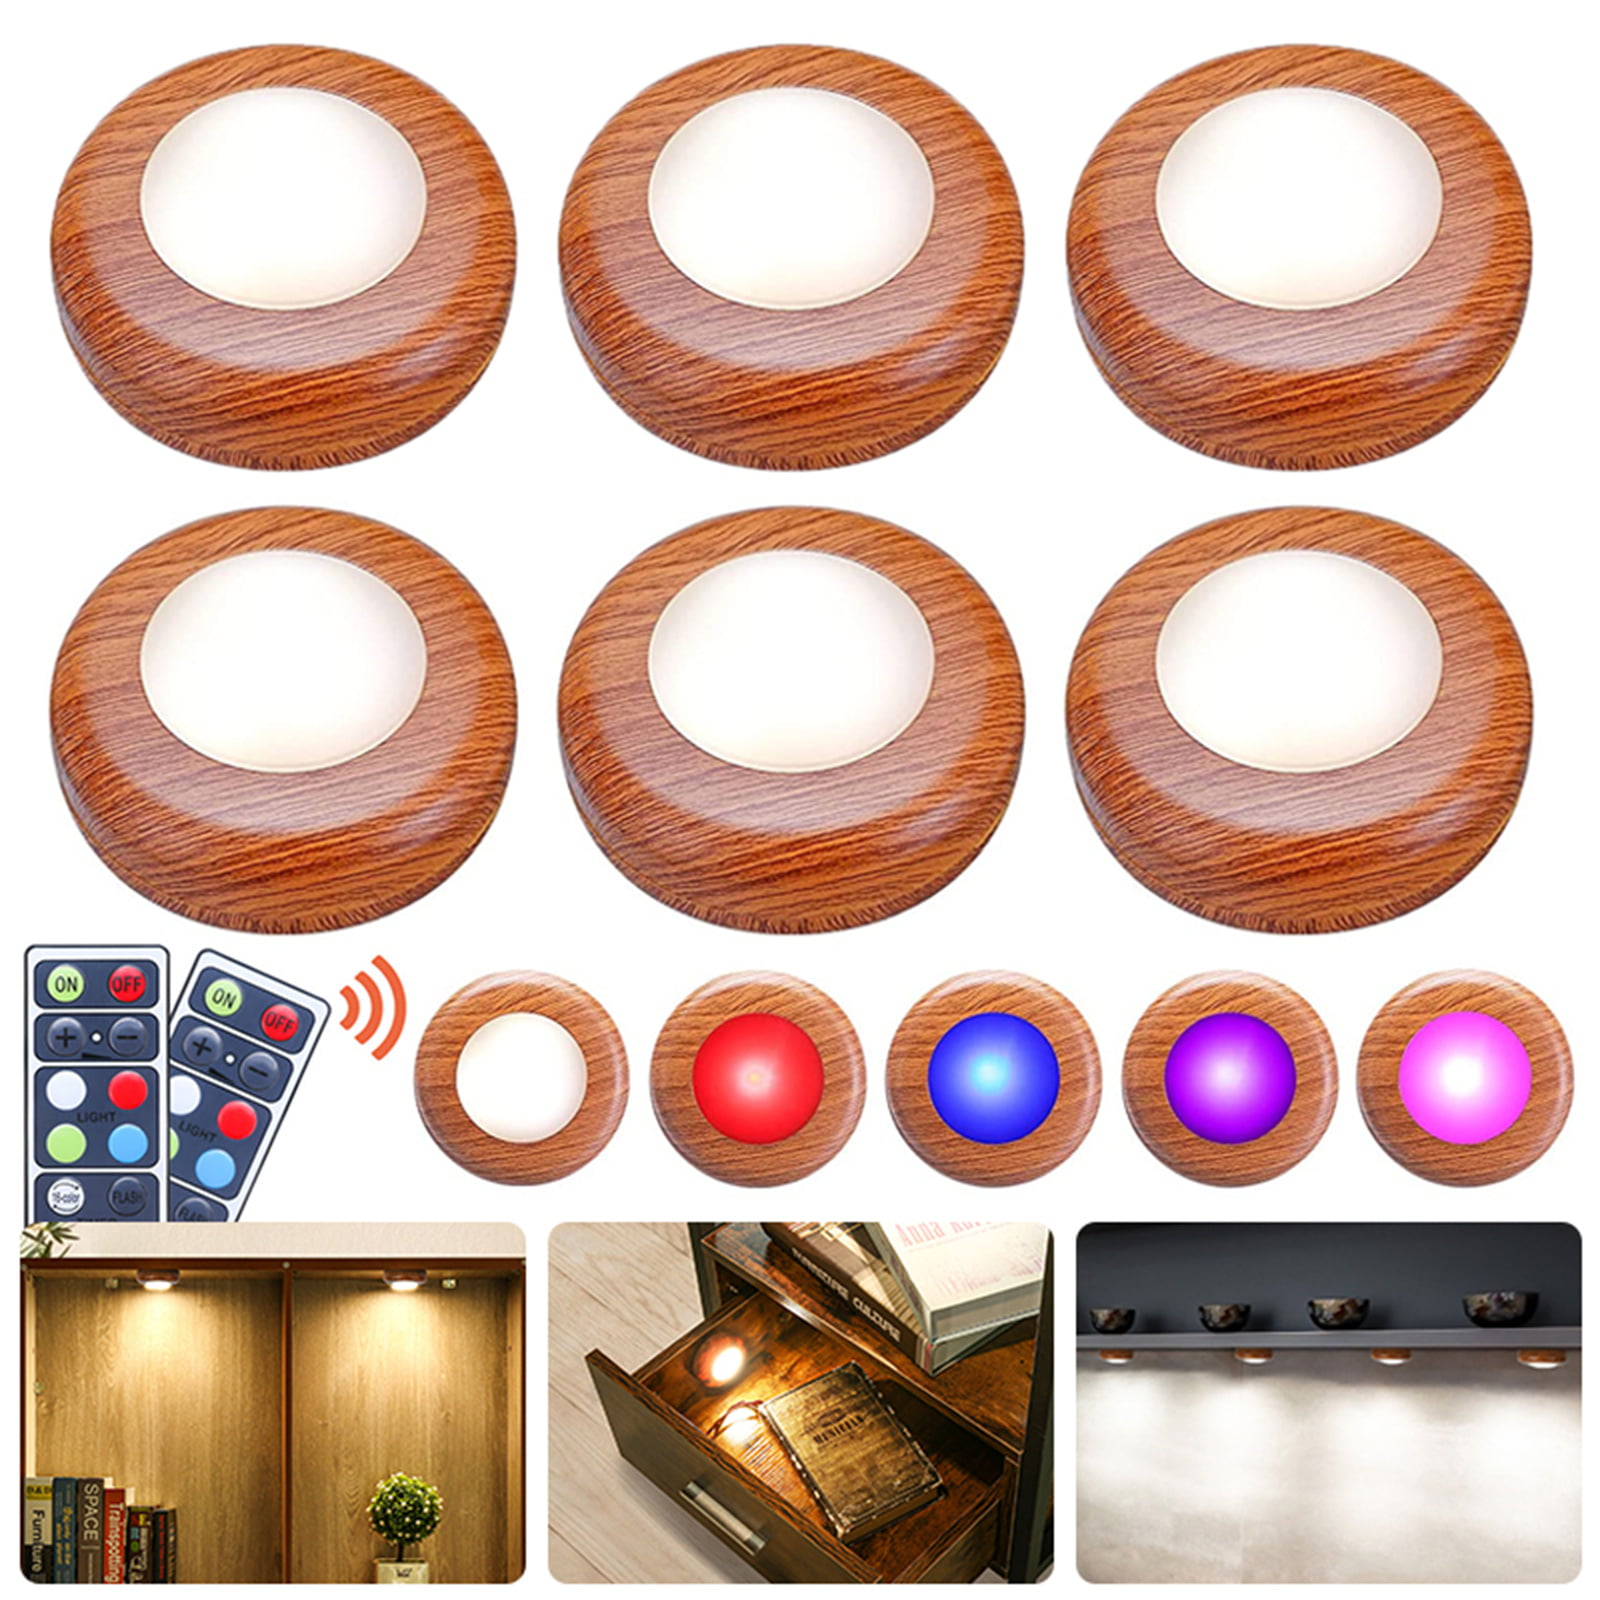 6 Pack Under Cabinet Lights Elfeland RGB Wireless LED Puck Lights Closet Lights 4000K Dimmable Battery Powered Remote Control Atmosphere Night Light Ideal for Cupboard Kitchen Wardrobe Color Changing